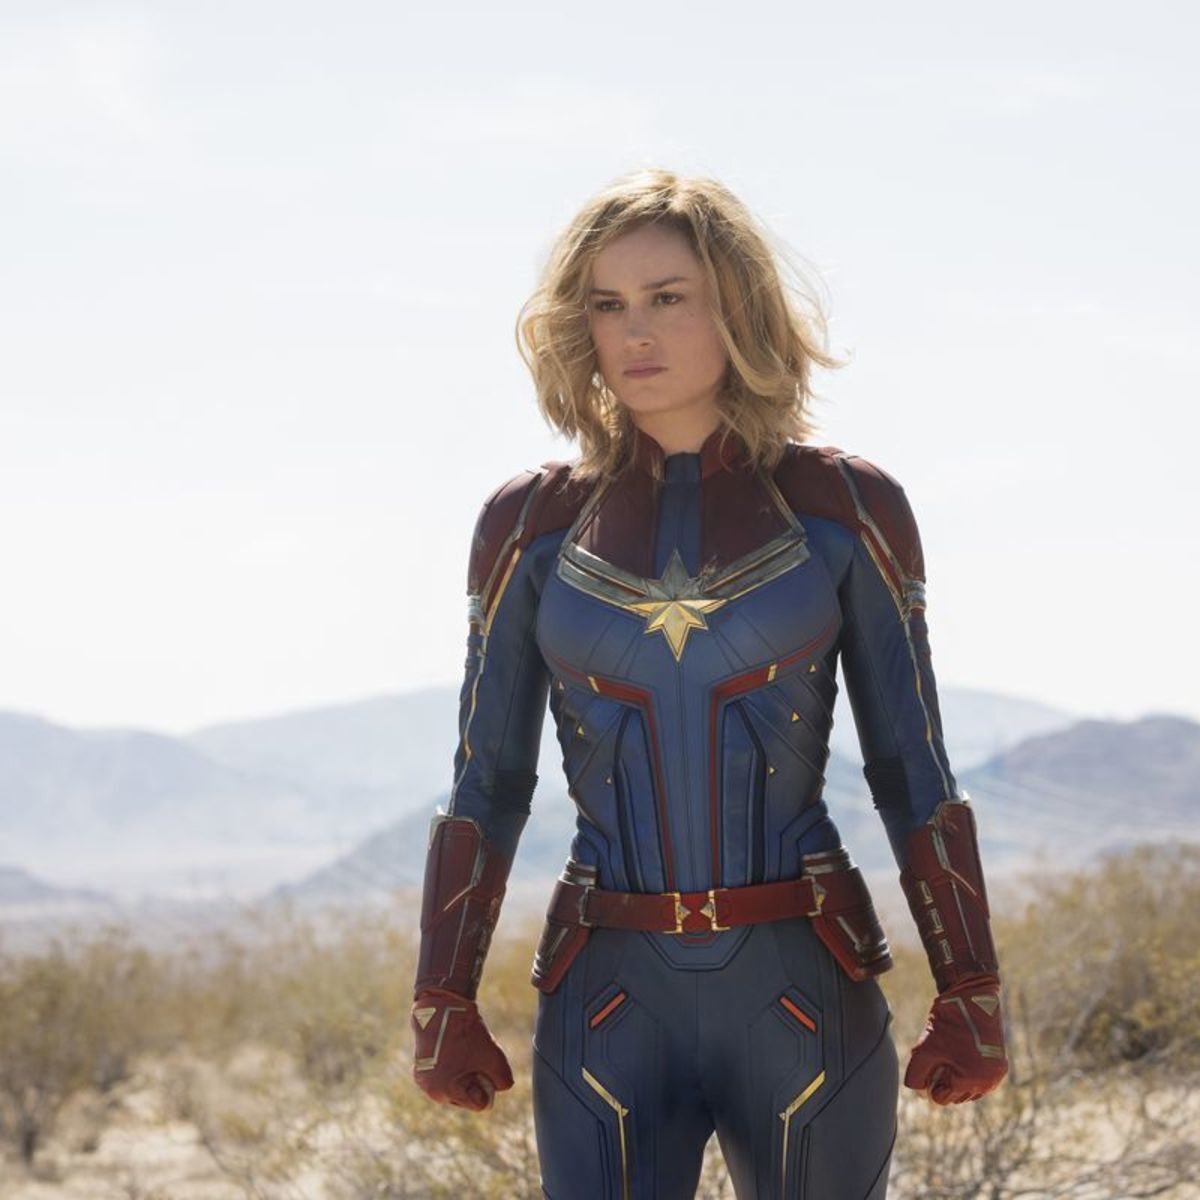 Brie Larson Reveals Another Look At Her Captain Marvel Costume While Urging People To Vote